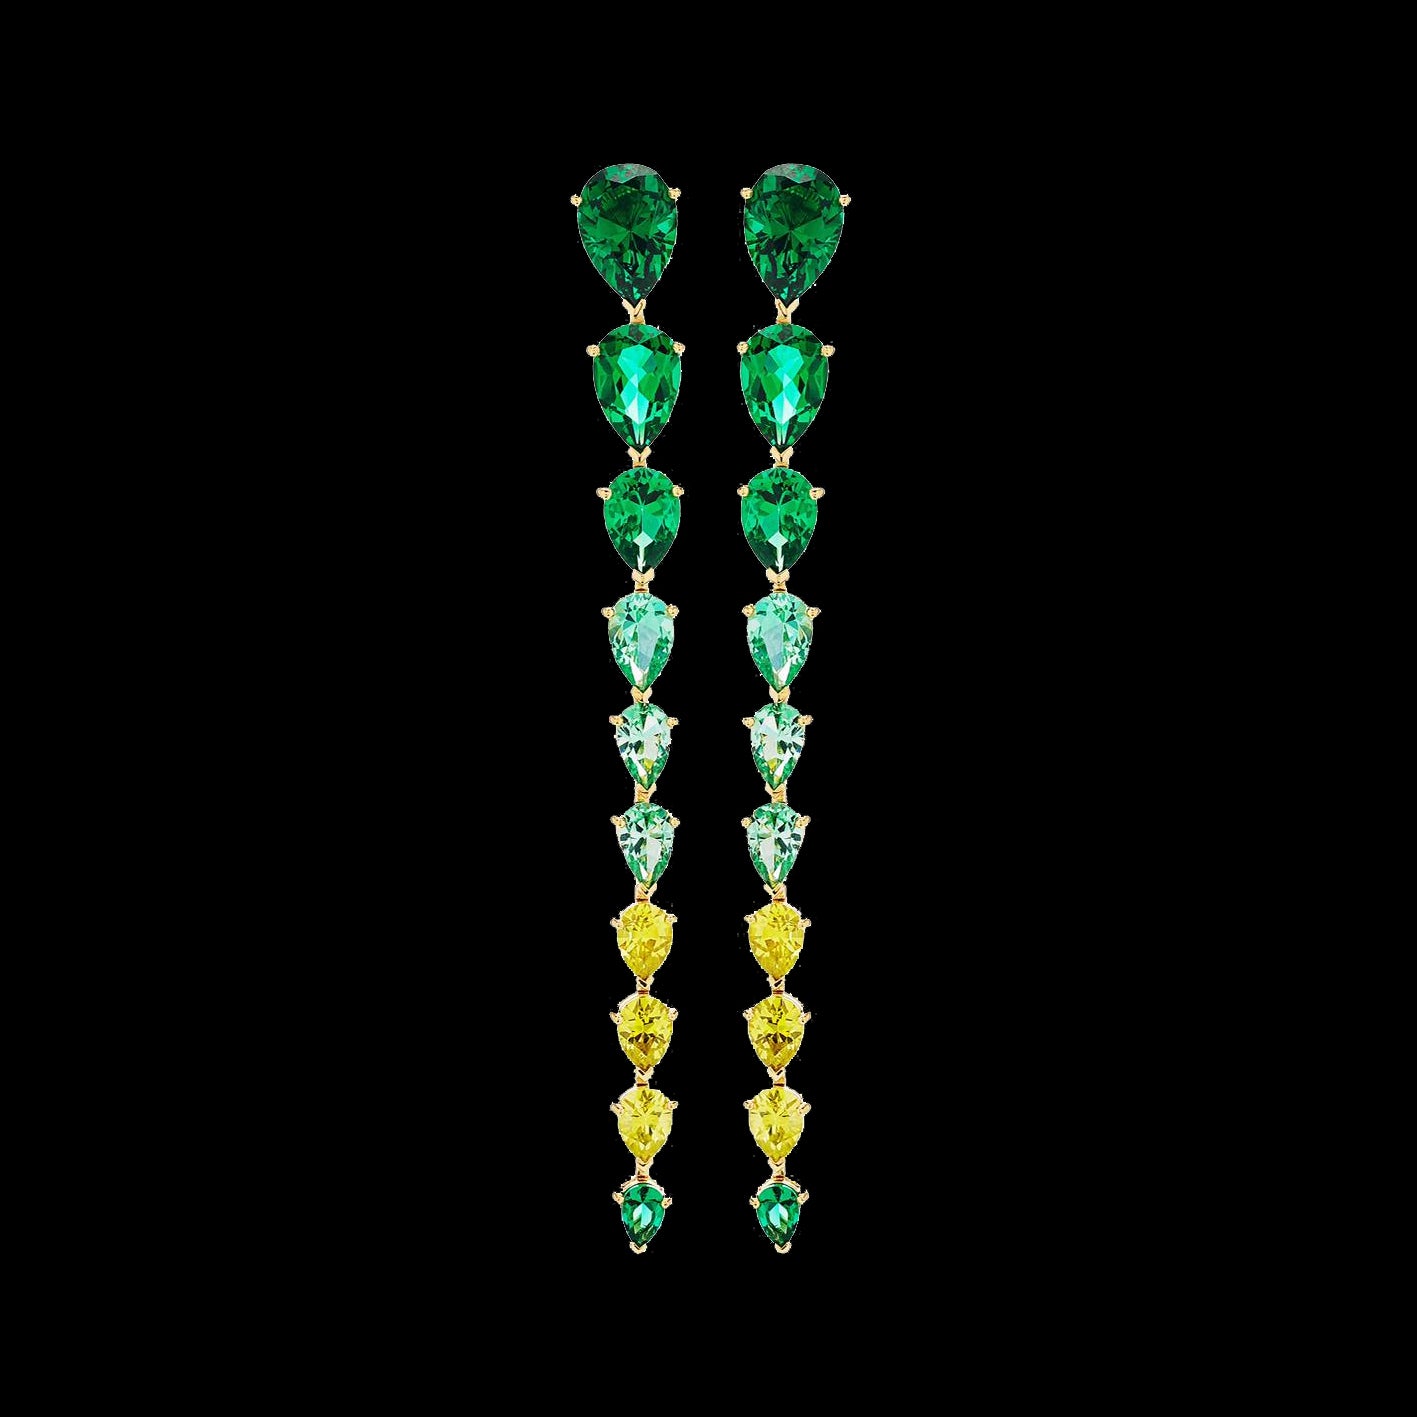 Emerald Nova Earrings, Earrings, Anabela Chan Joaillerie - Fine jewelry with laboratory grown and created gemstones hand-crafted in the United Kingdom. Anabela Chan Joaillerie is the first fine jewellery brand in the world to champion laboratory-grown and created gemstones with high jewellery design, artisanal craftsmanship and a focus on ethical and sustainable innovations.